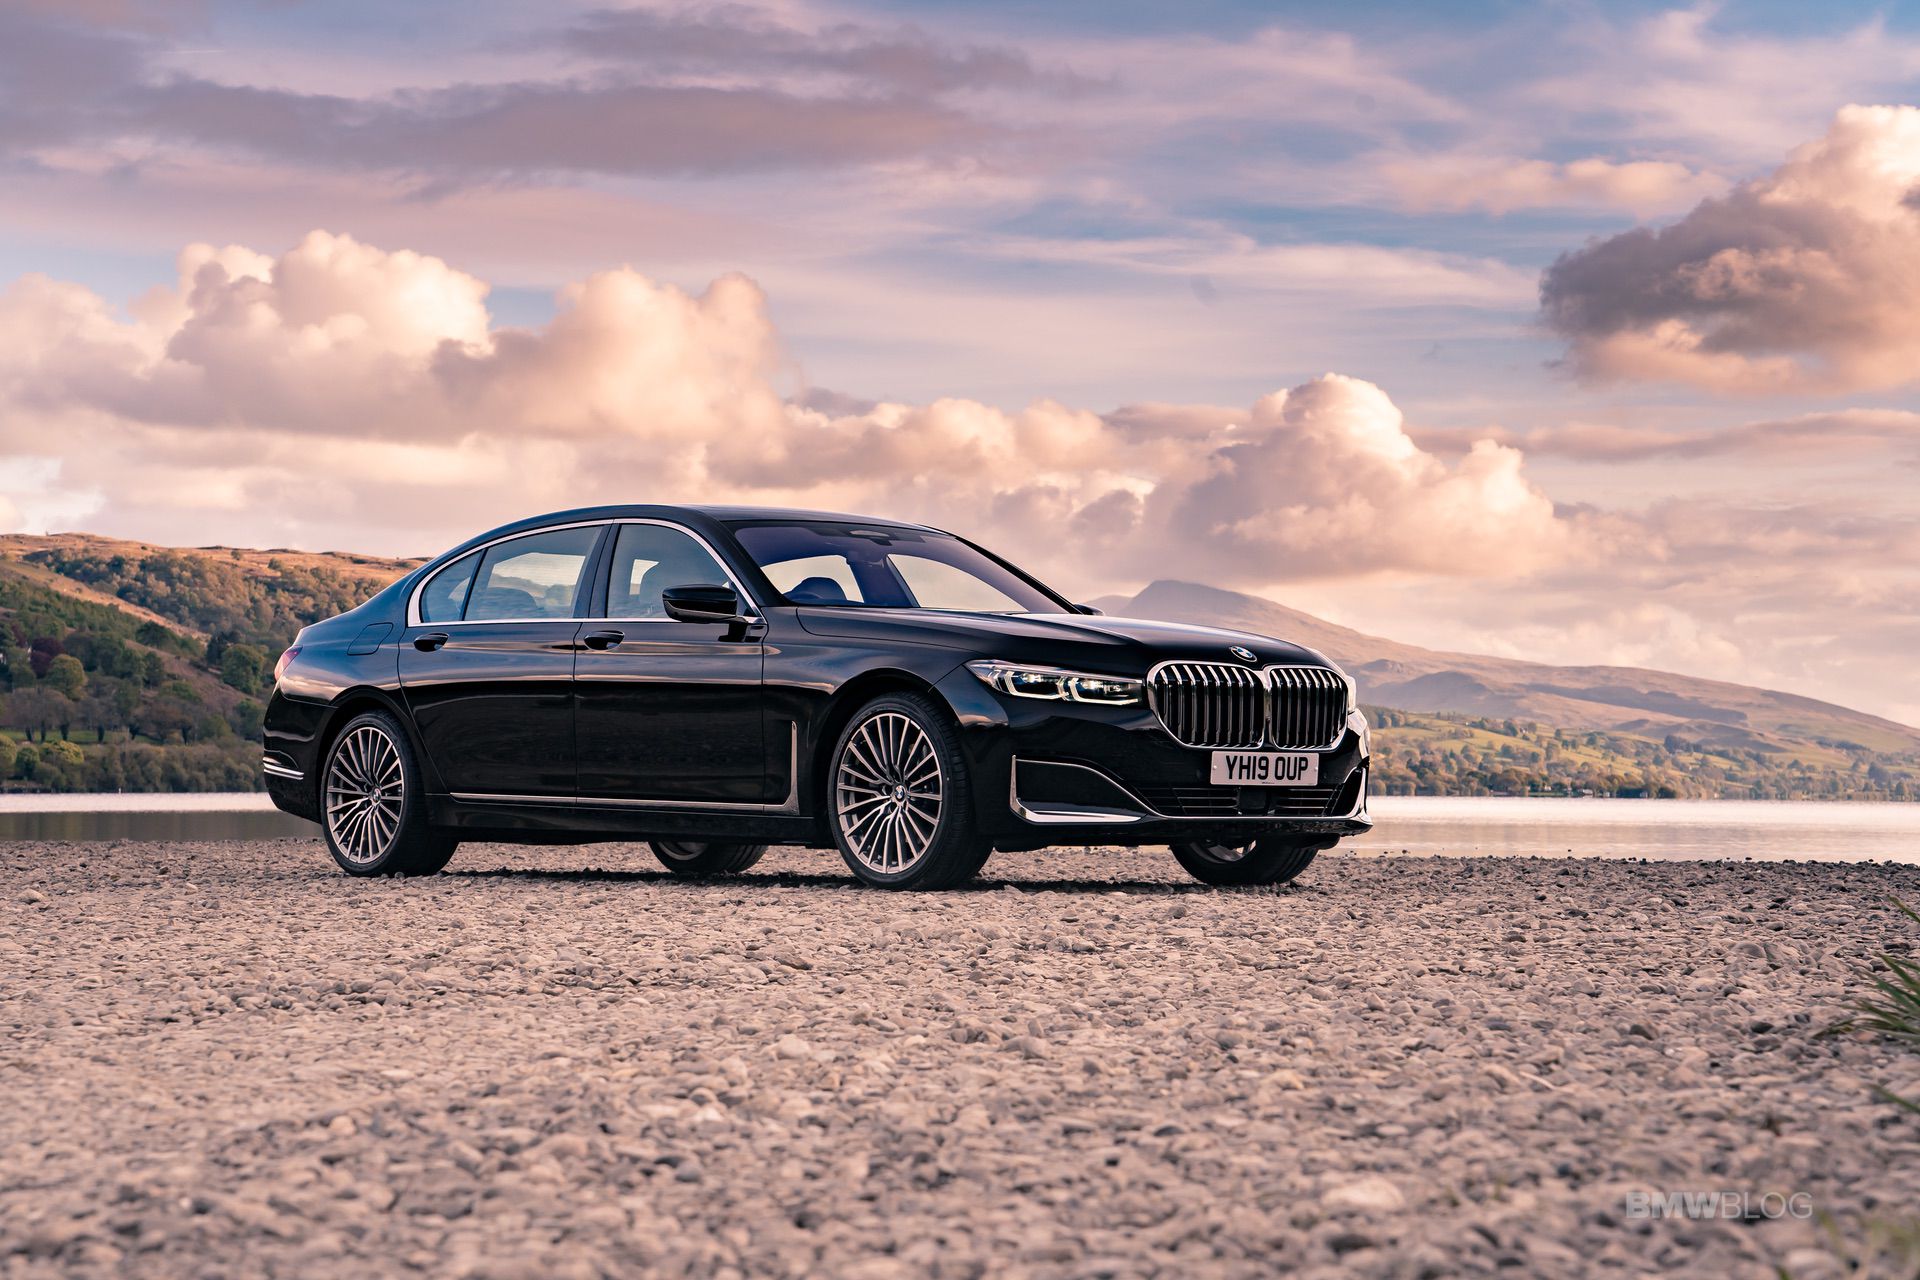 The BMW 7 Series is among the Top 10 most comfortable cars